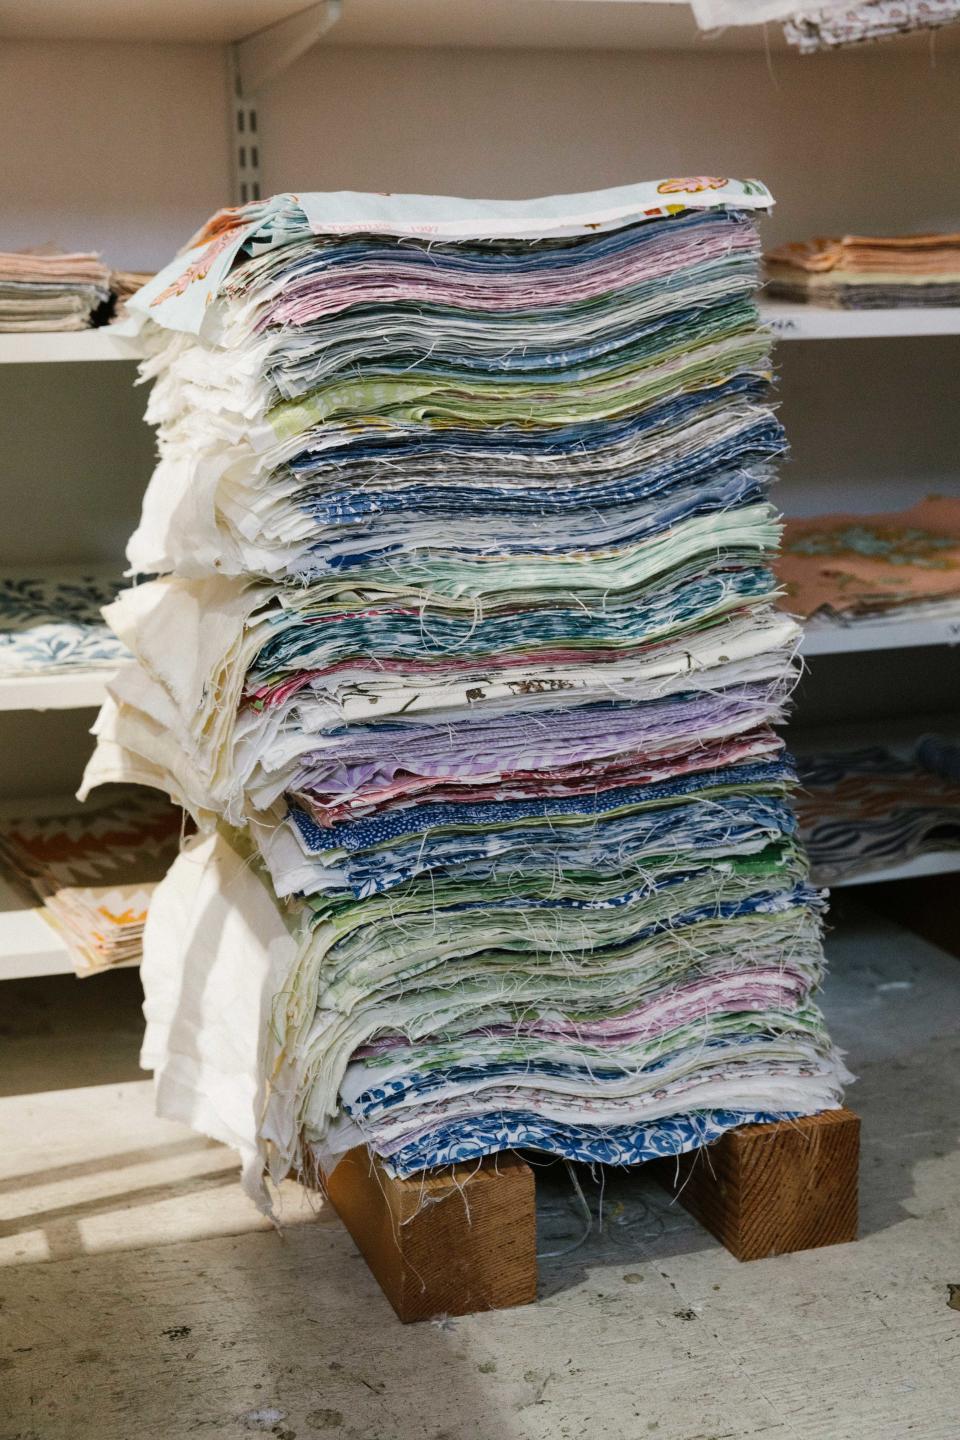 A heap of textiles in the Raoul factory.